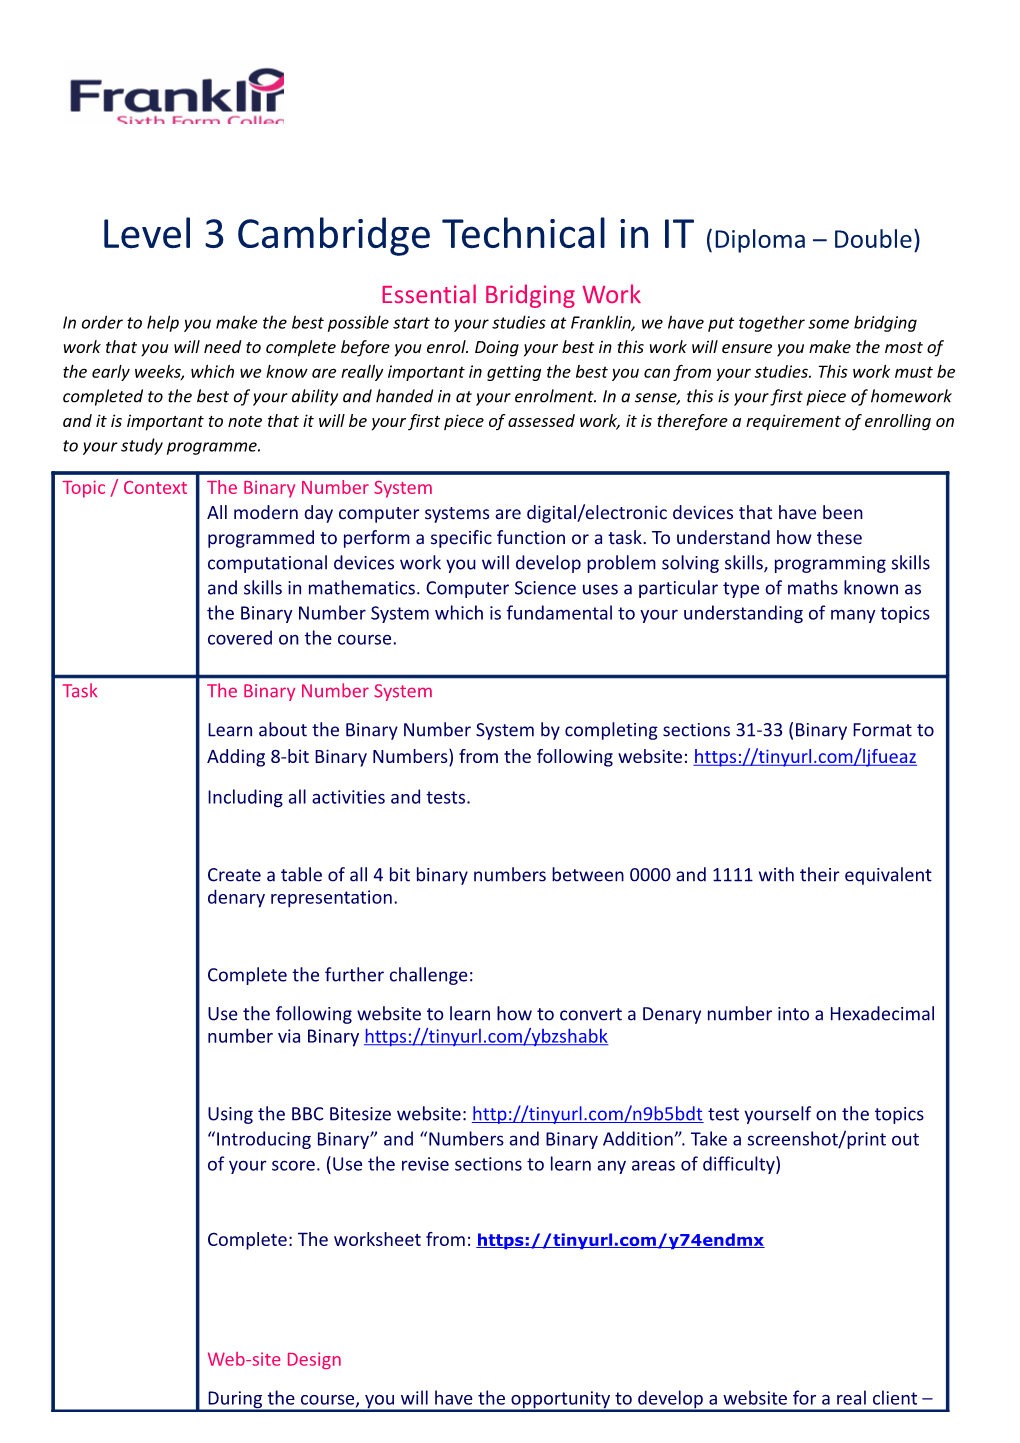 Level 3 Cambridge Technical in IT(Diploma Double)